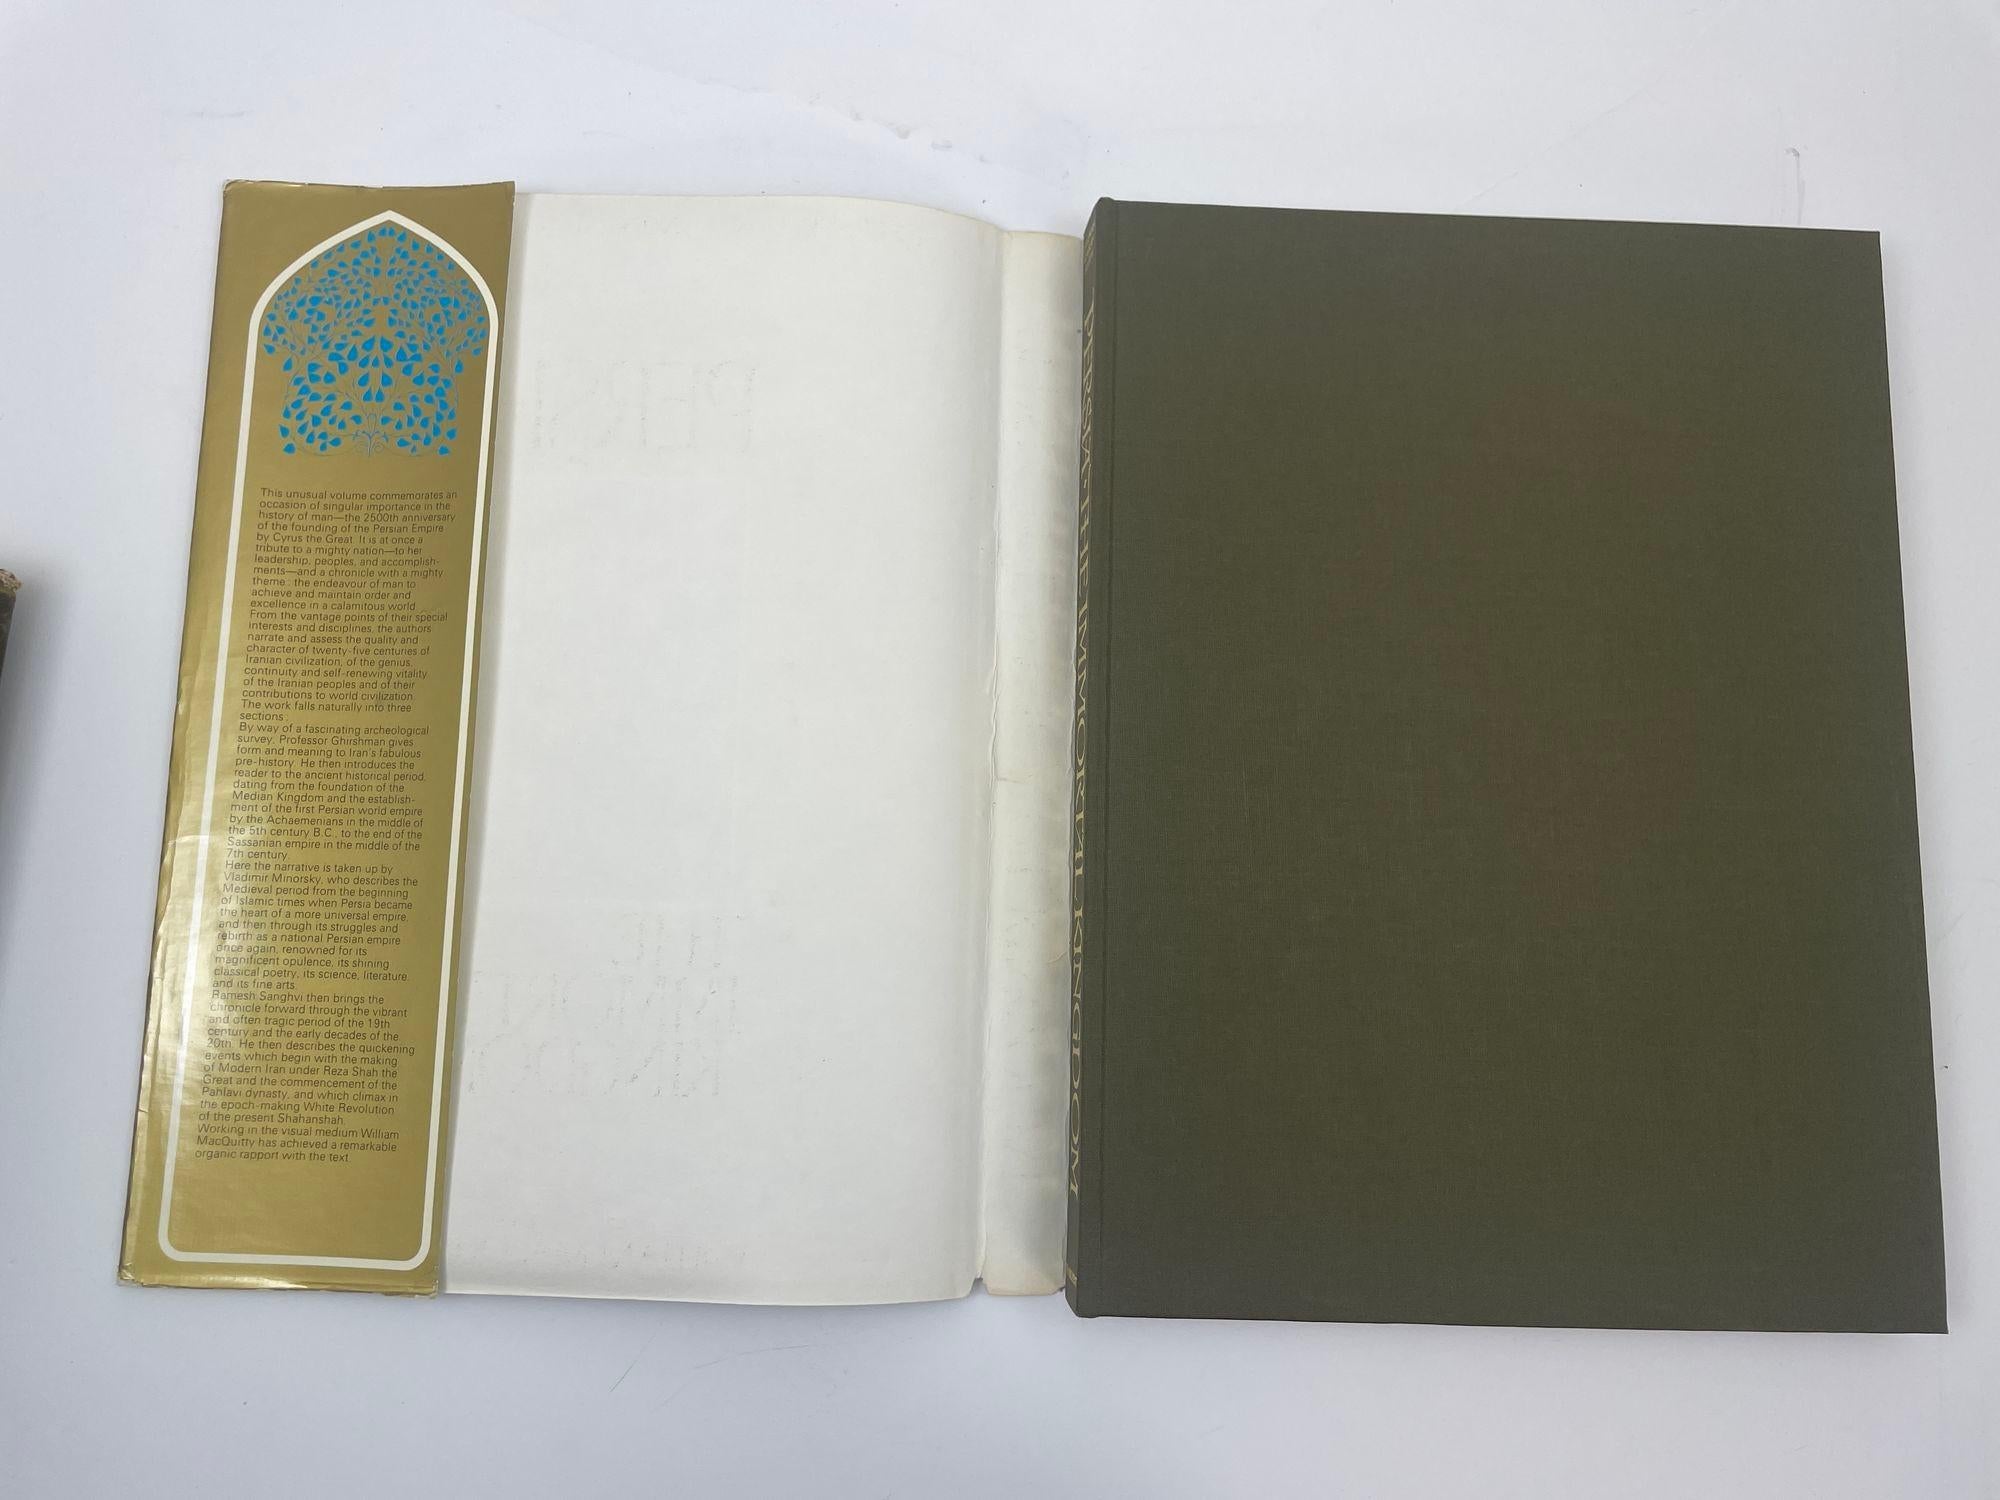 Persia The Immortal Kingdom by Ghirshman Minorsky Sanghvi 1971 For Sale 2